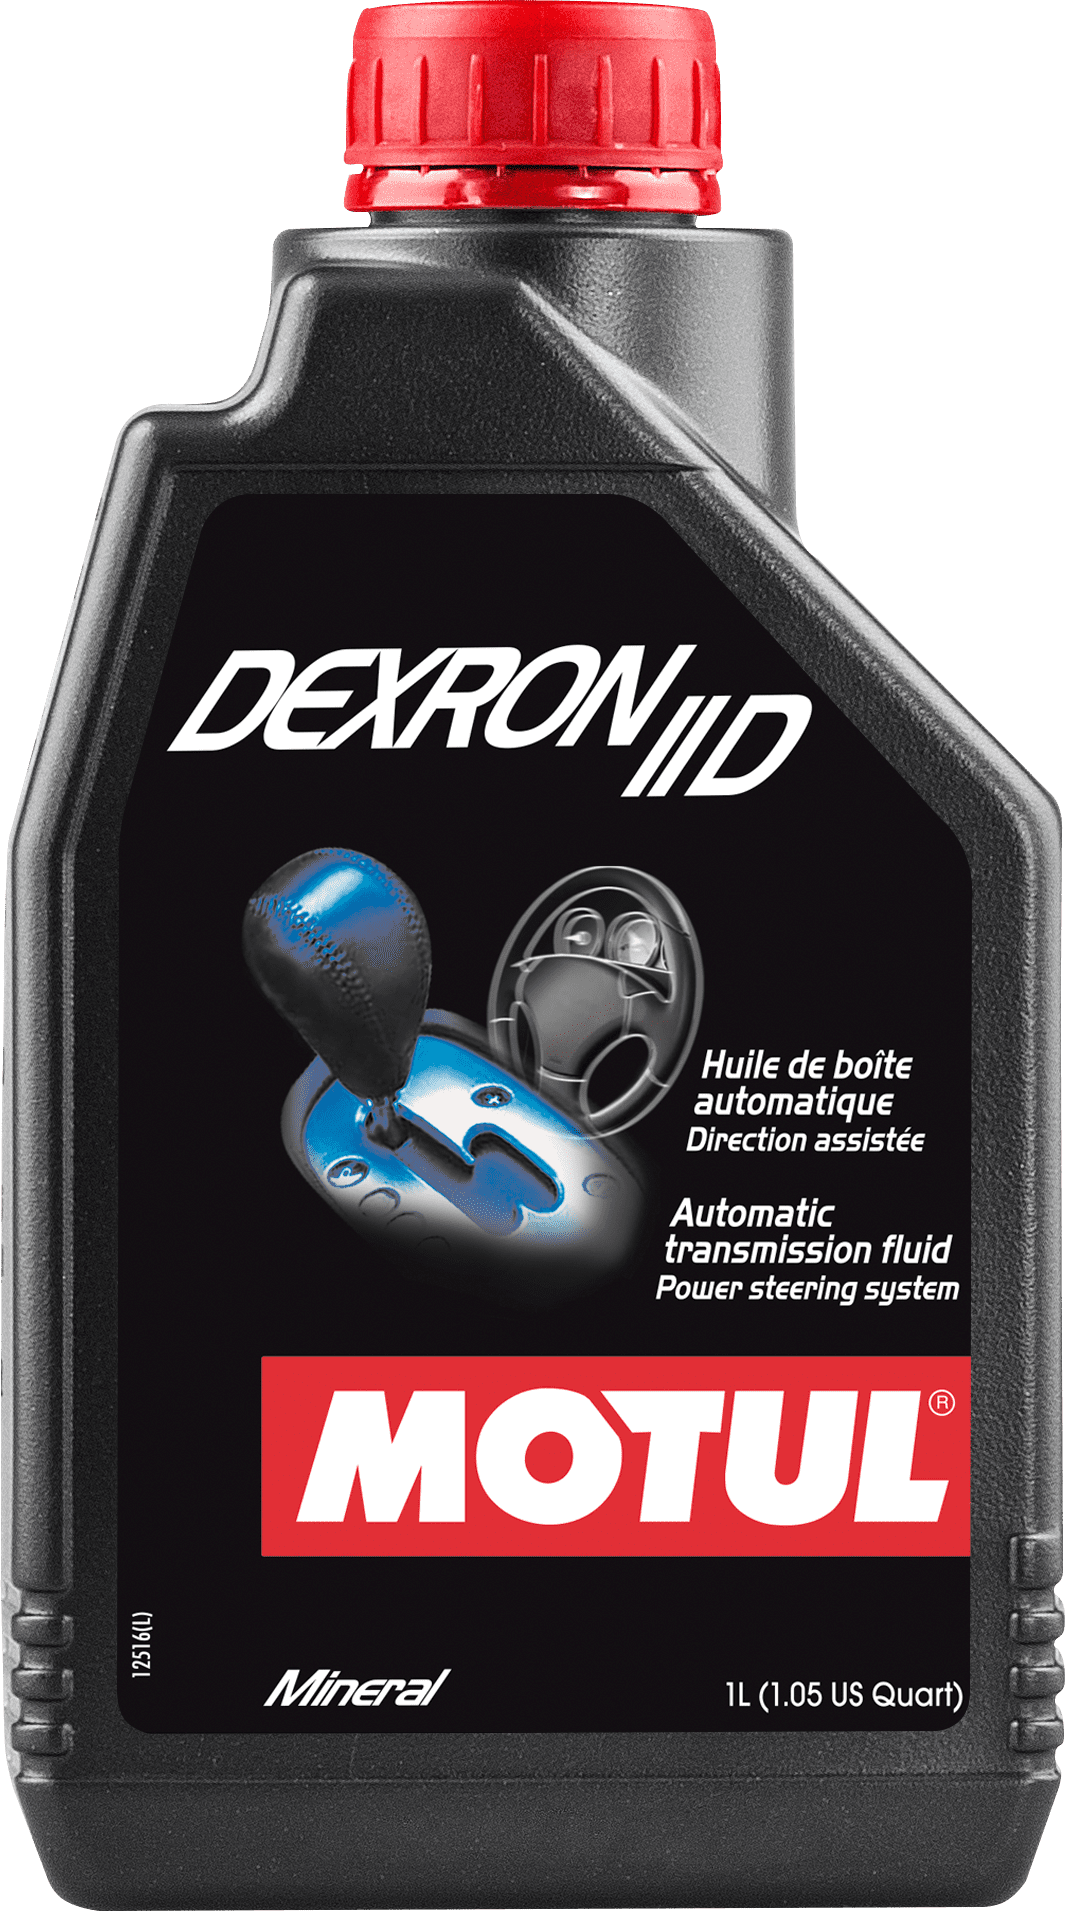 105775-1 Automatic Transmission Fluid for all systems where DEXRON II standard is required : Automatic gearboxes and transmissions, torque converters, power steering systems, hydraulic circuits, boat reversing gear.